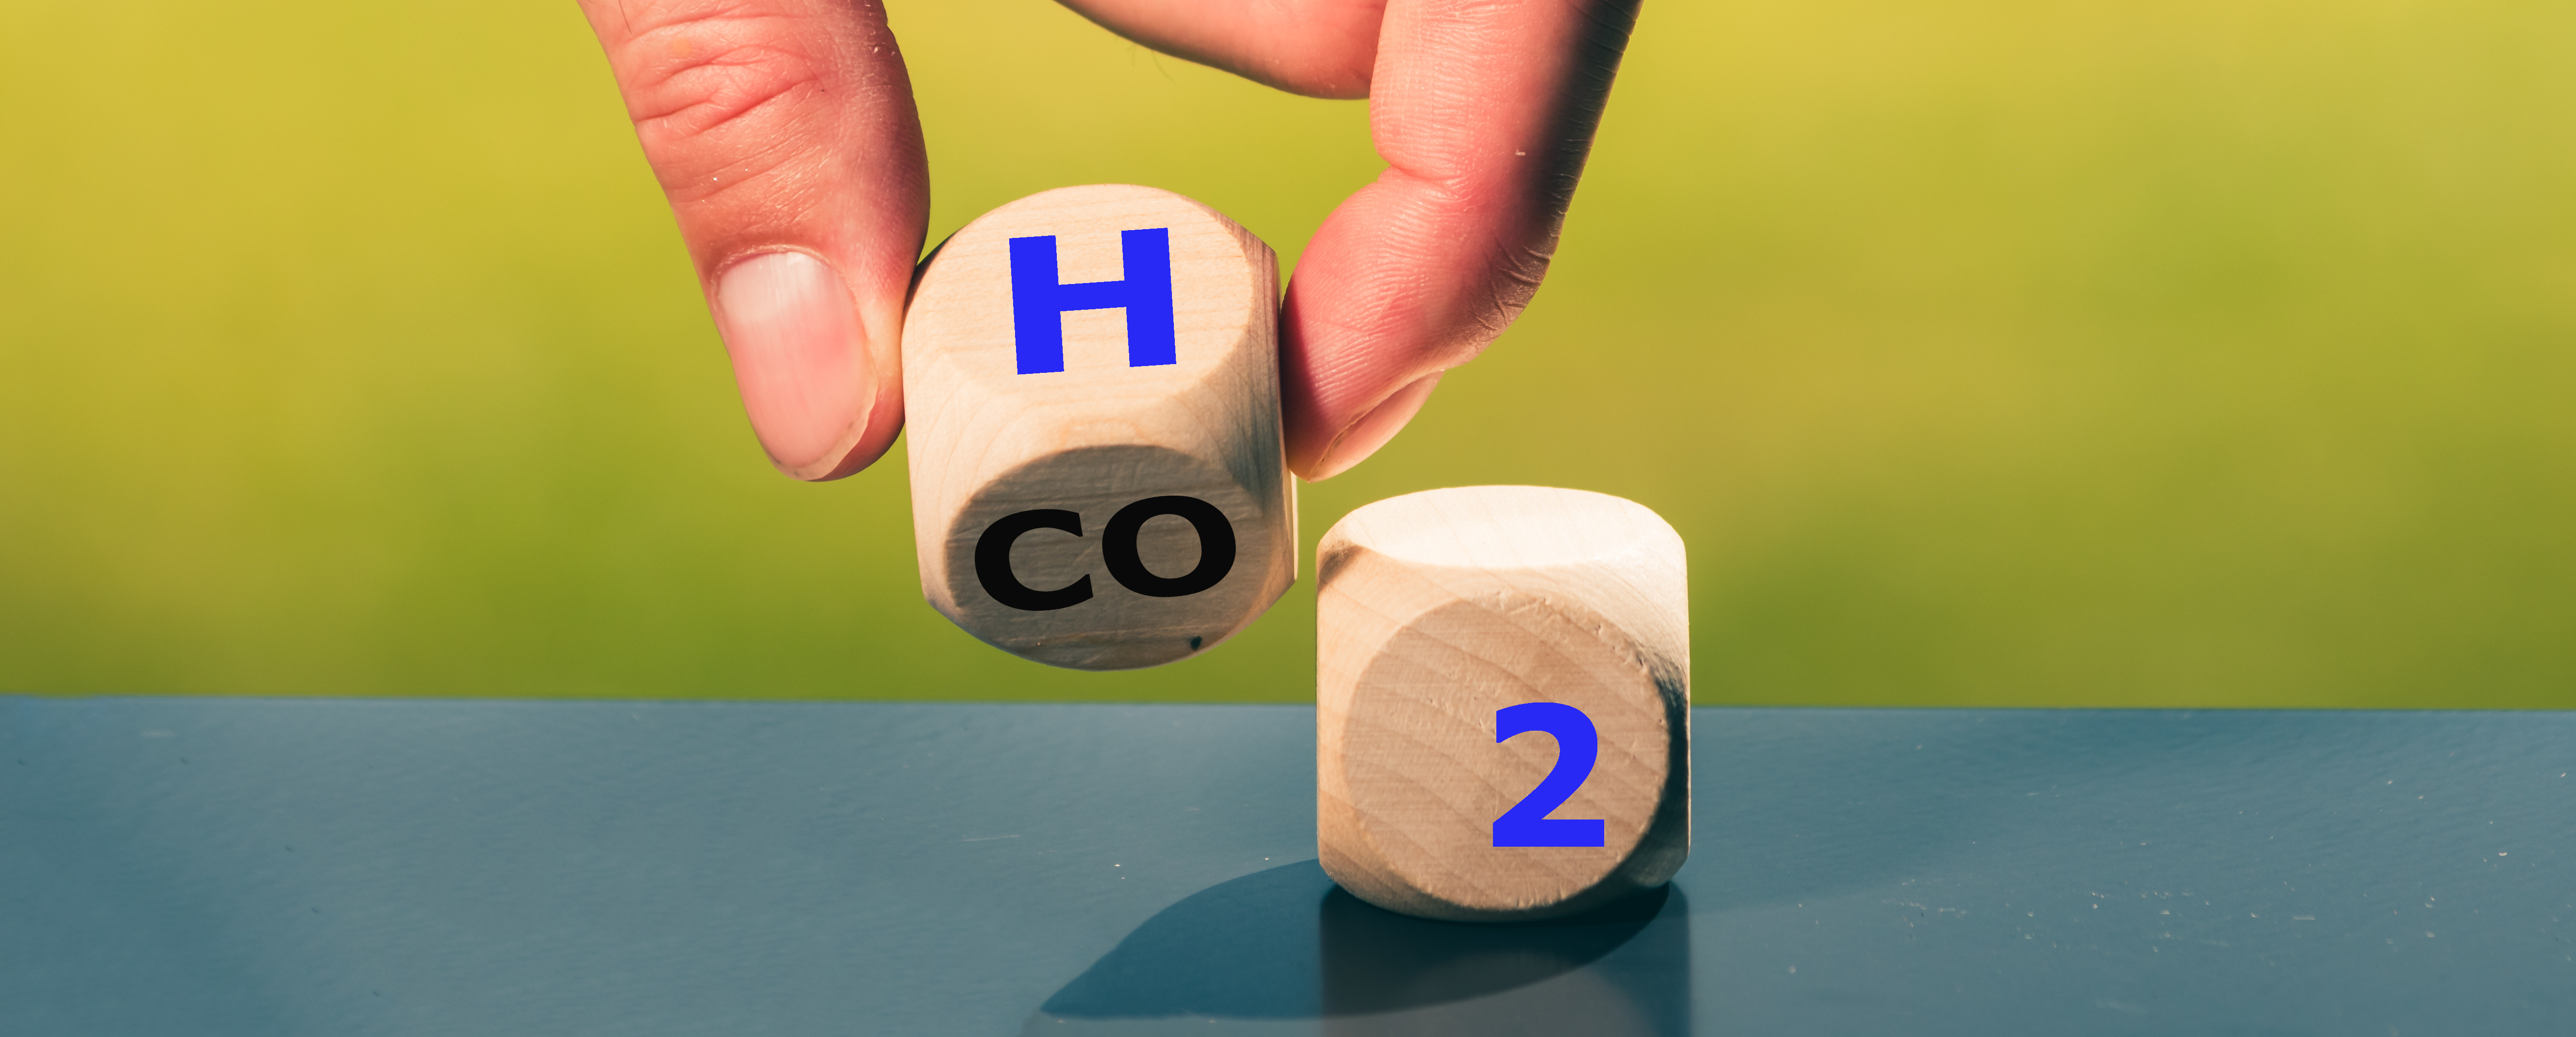 Hydrogen and carbon dioxide elements representing hydrogen and syngas plant design capabilities